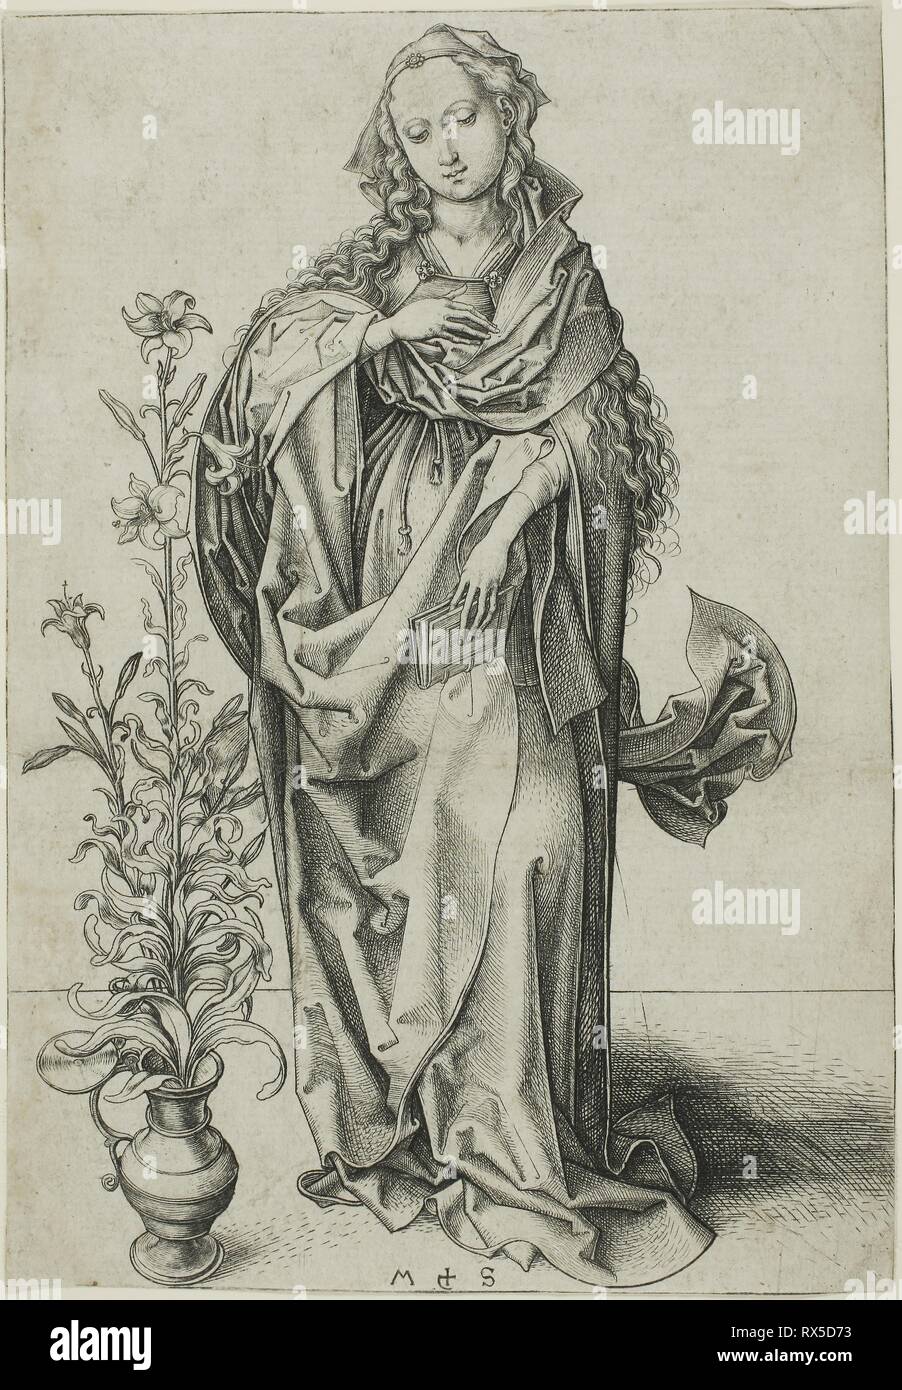 The Virgin of the Annunciation. Martin Schongauer; German, c. 1450-1491. Date: 1470-1475. Dimensions: 170 x 117 mm (sheet, trimmed to plate mark). Engraving in black on ivory laid paper. Origin: Germany. Museum: The Chicago Art Institute. Stock Photo